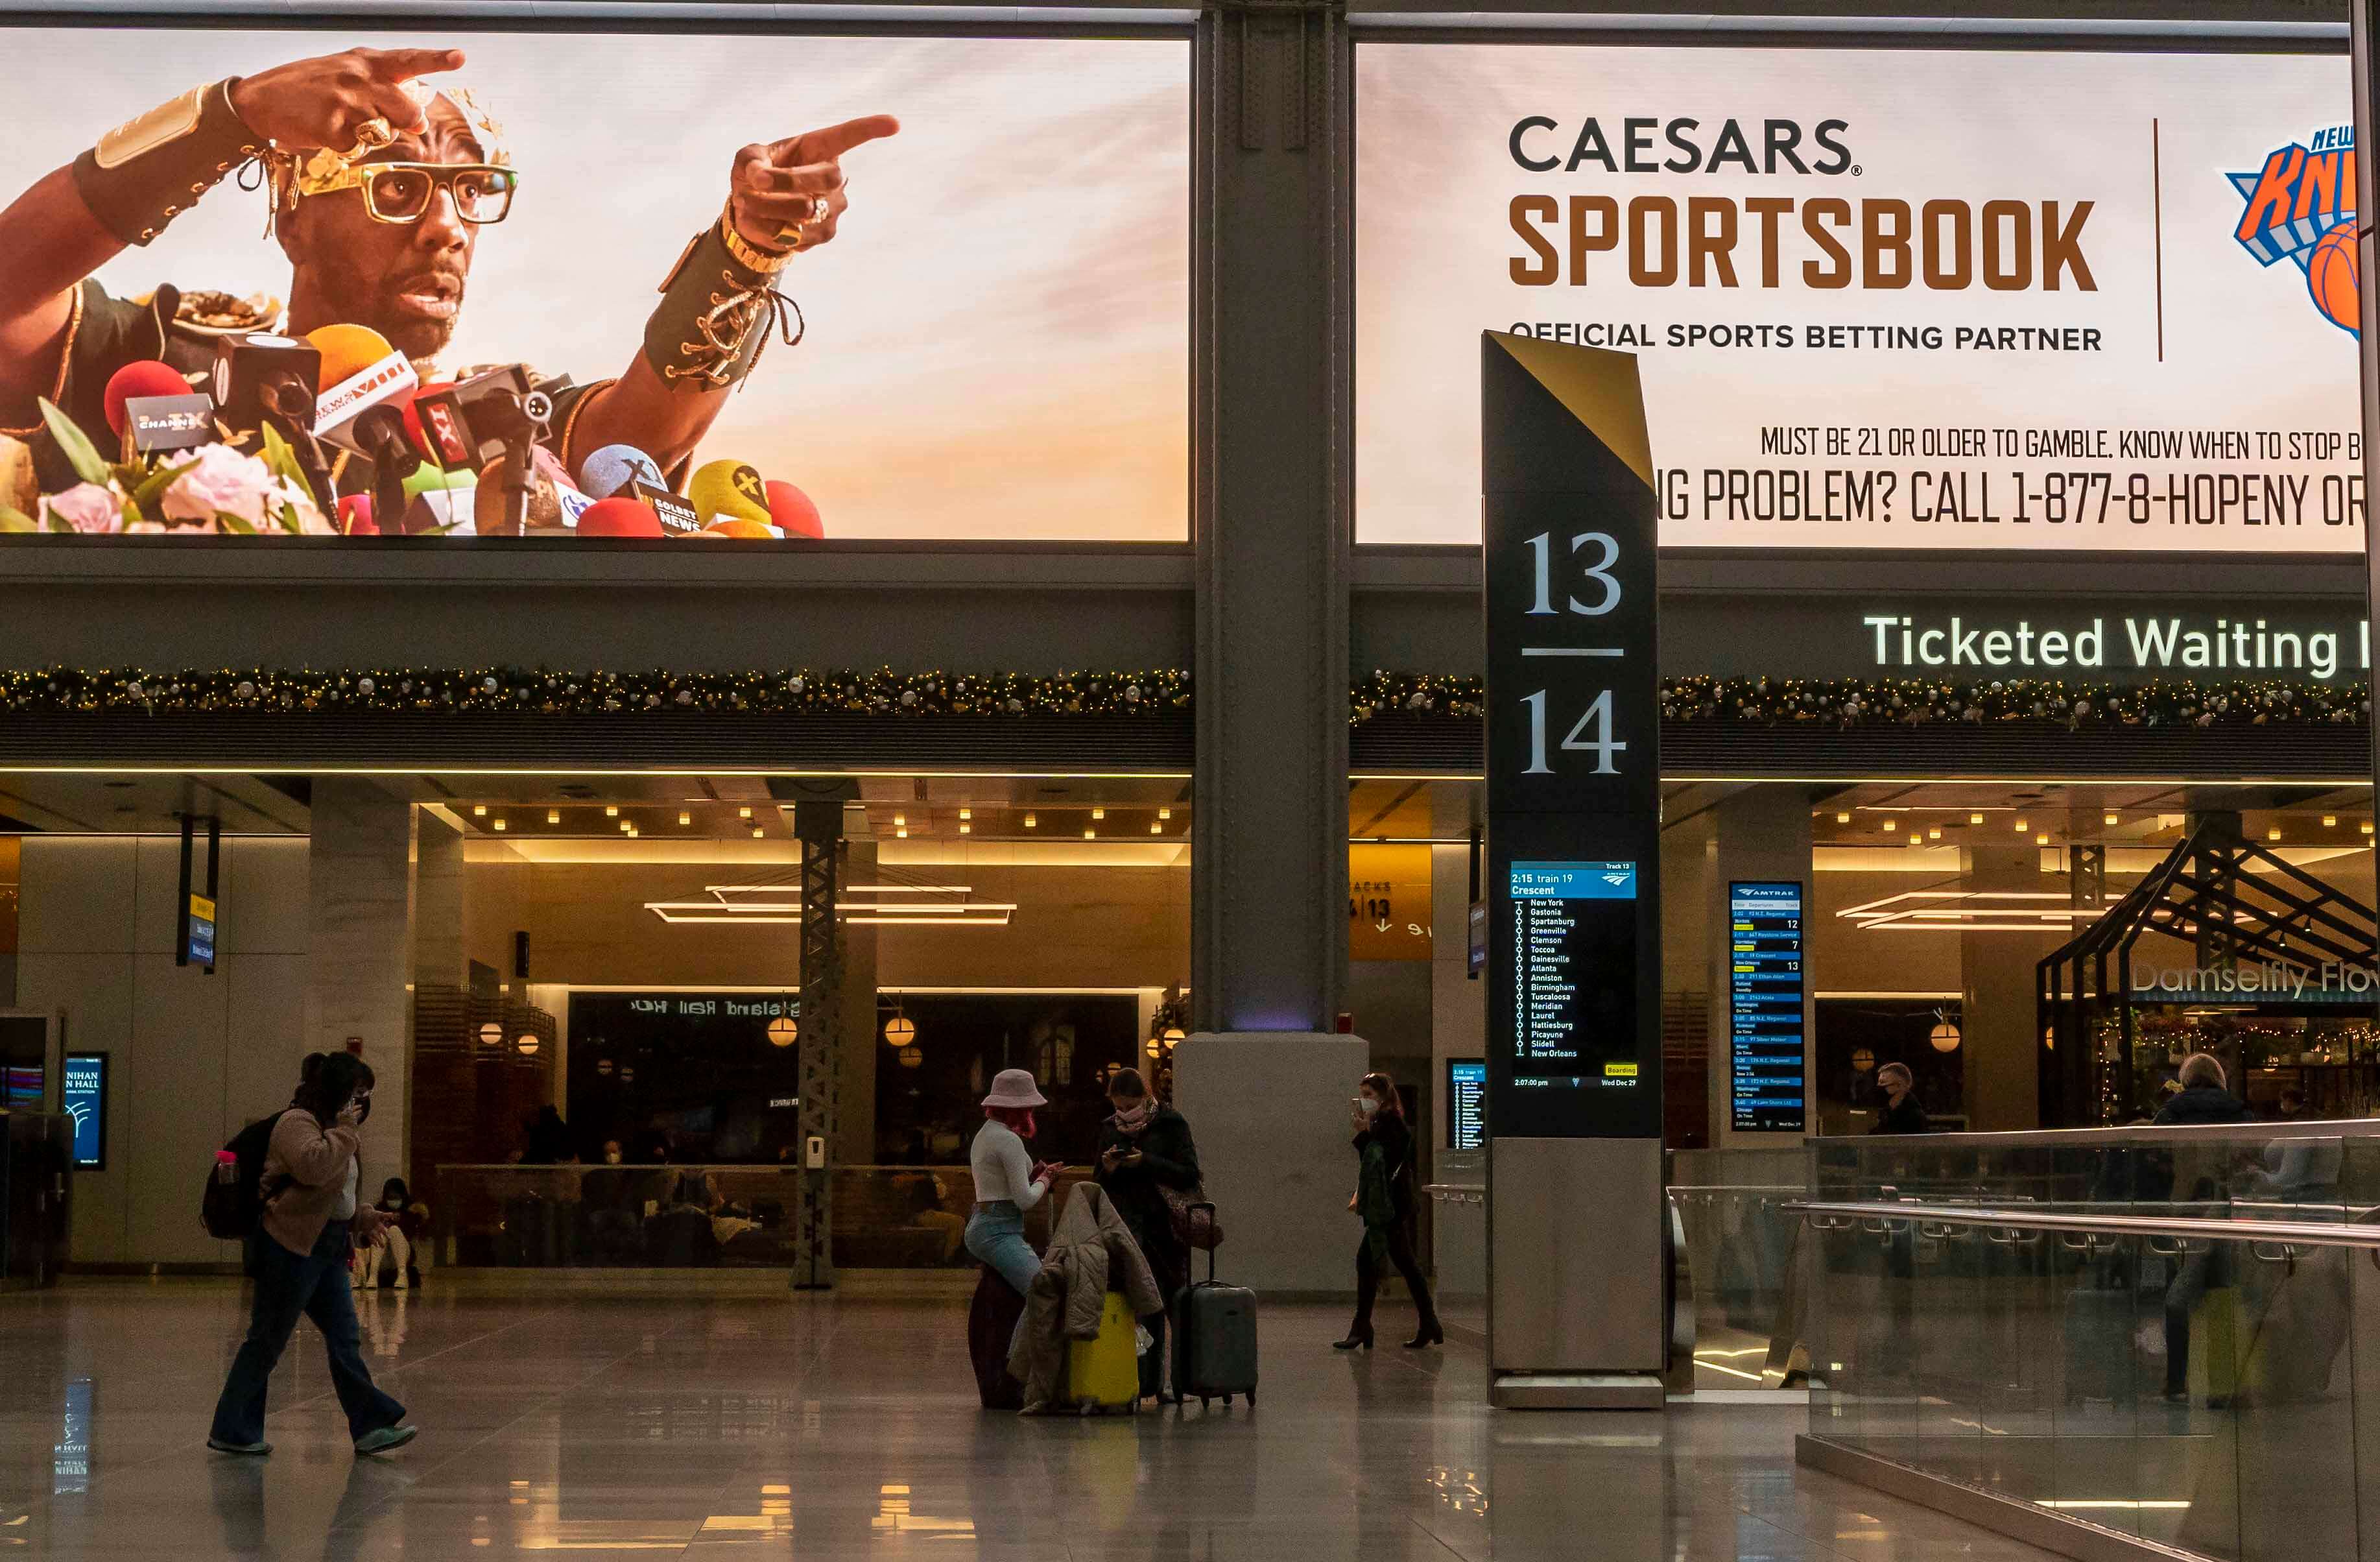 An advertisement for Caesars Sportsbook is seen in New York City.